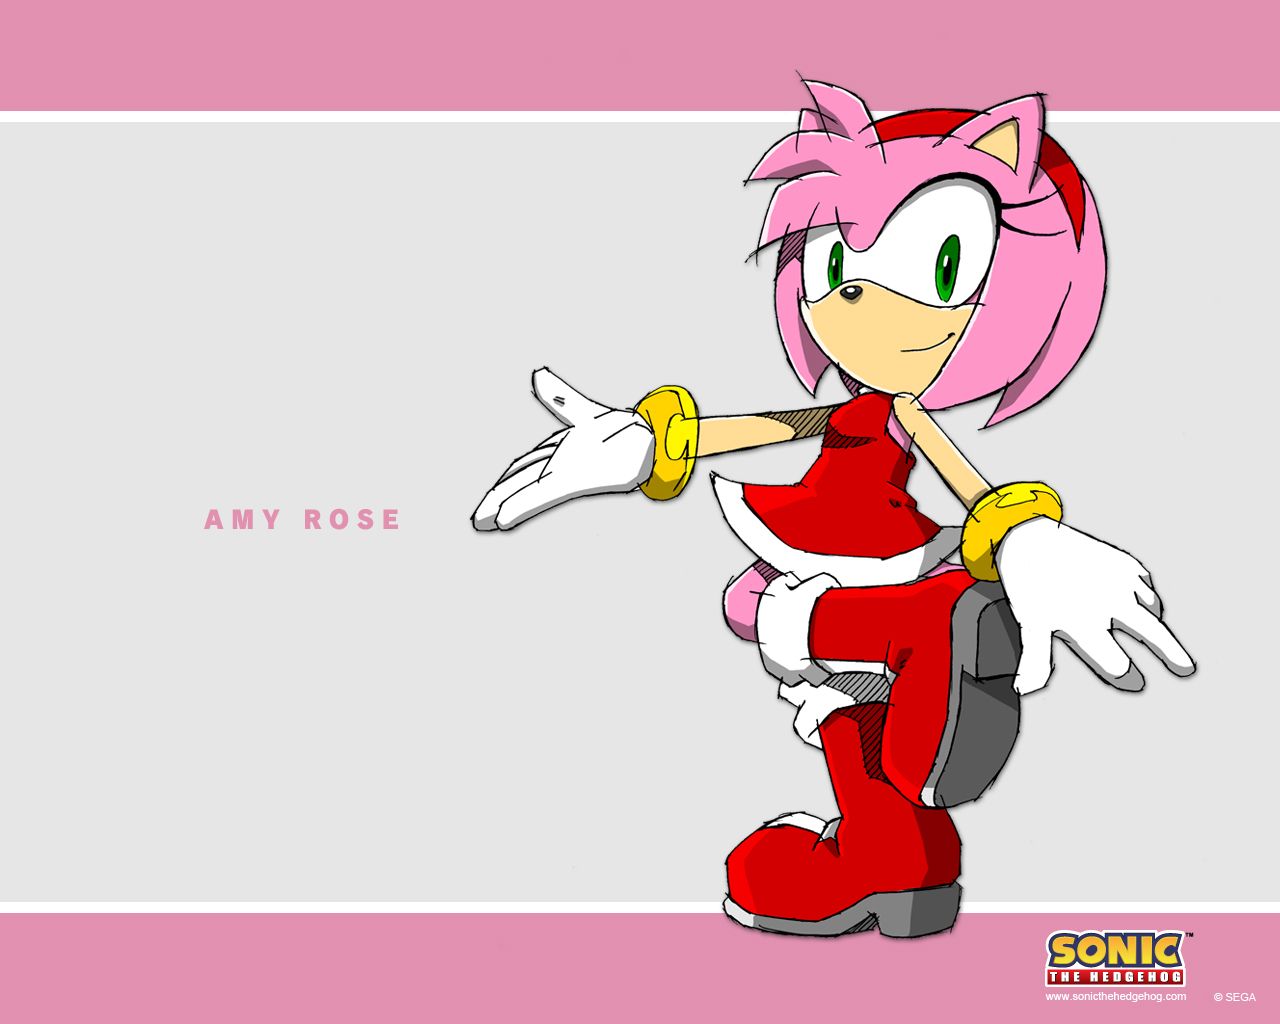 Sonic Advance 3 Wallpaper Related Keywords & Suggestions. Sonic, Sonic the hedgehog, Amy rose